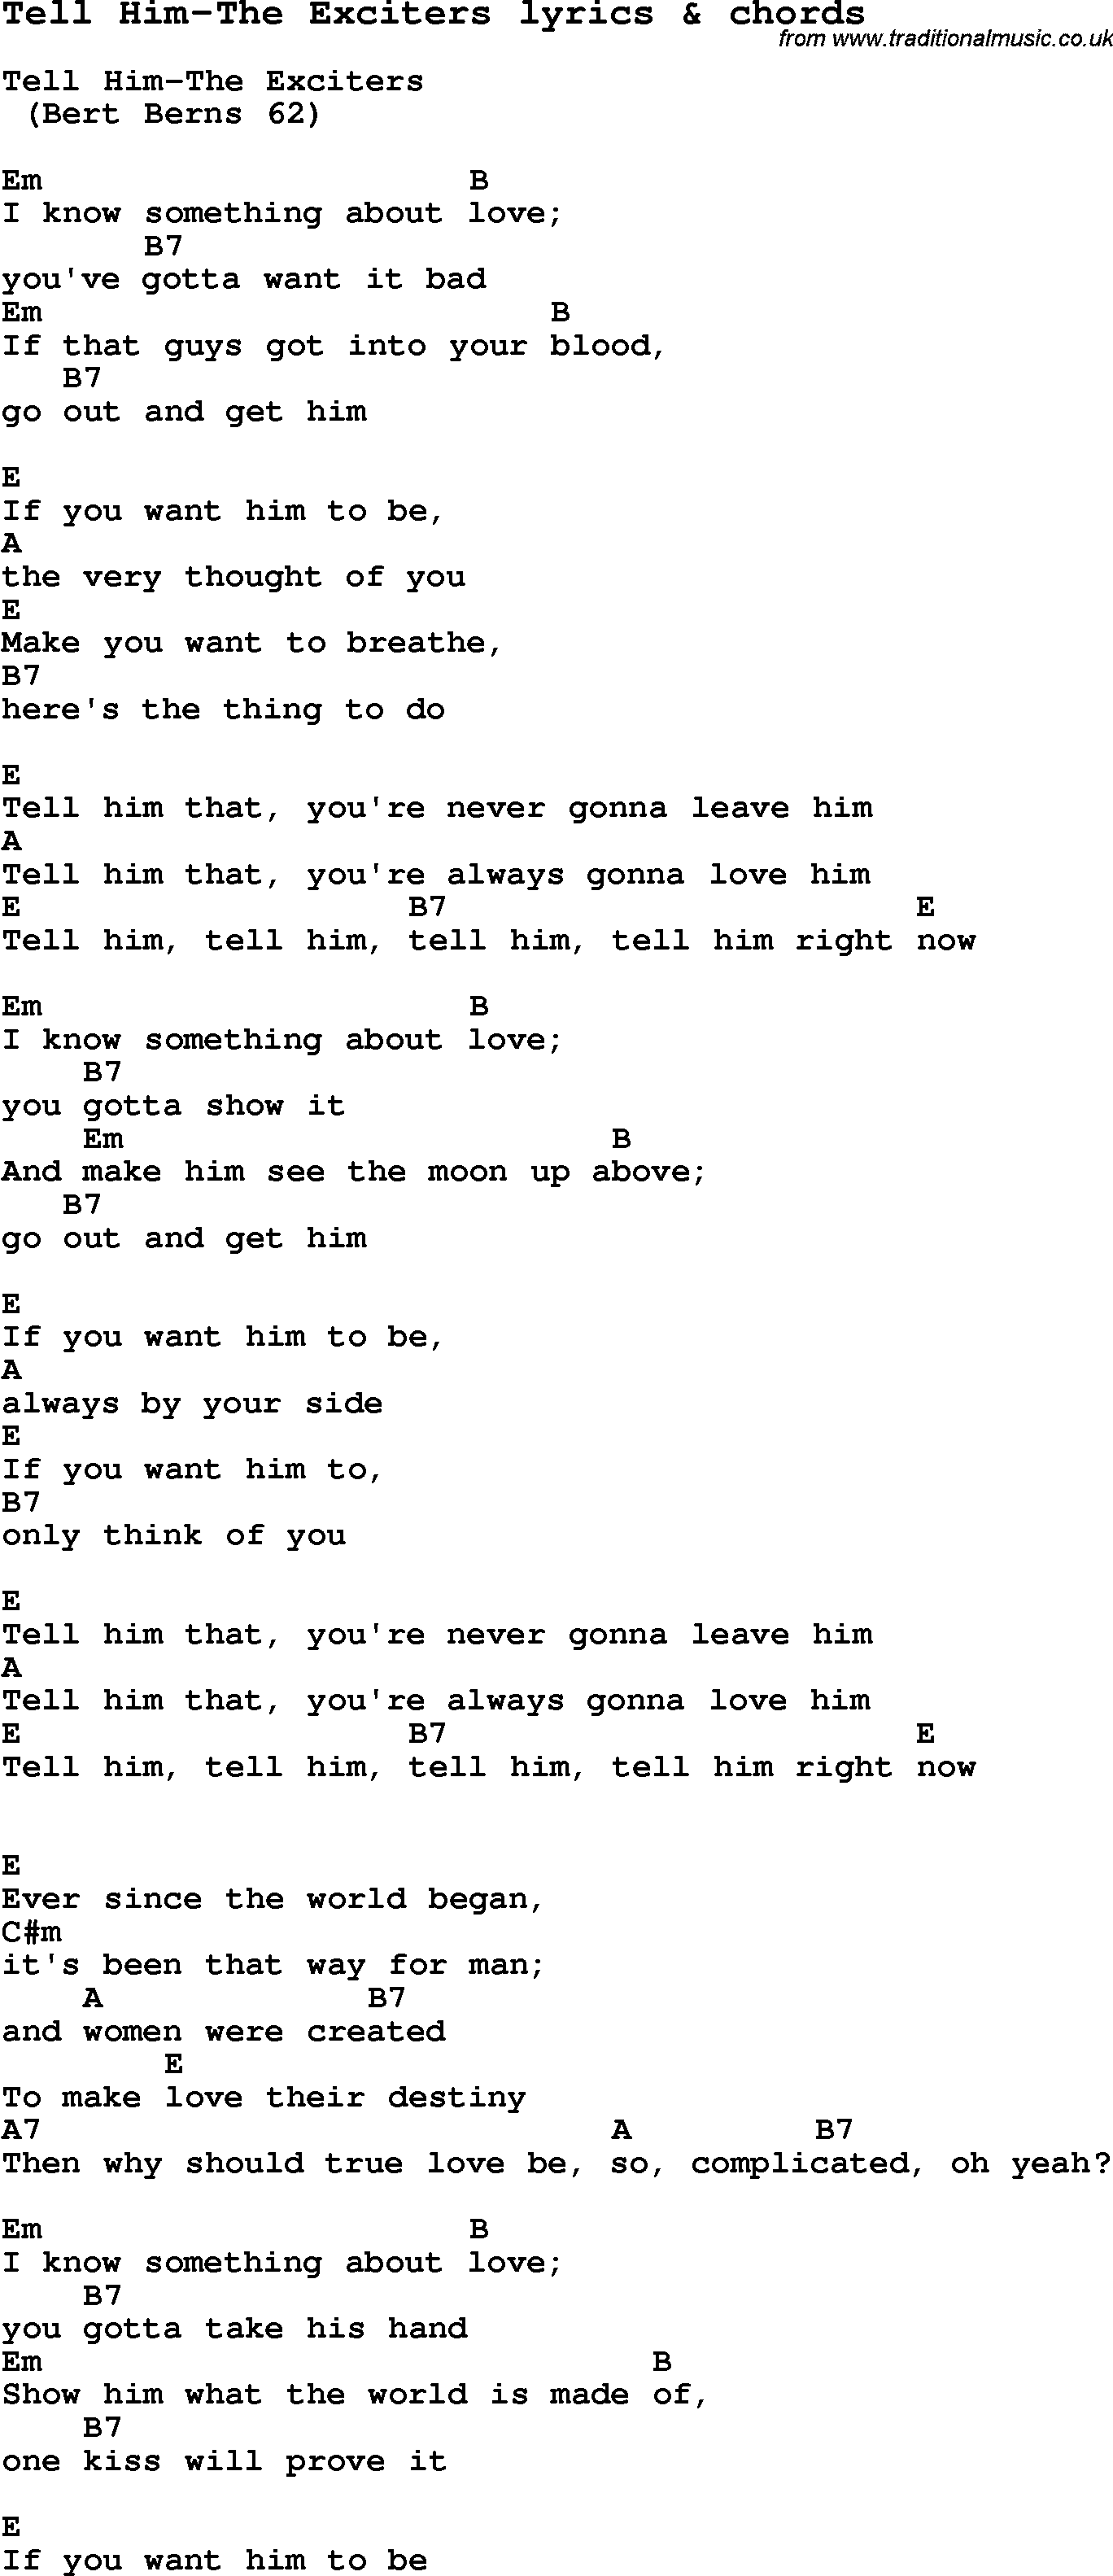 Love Song Lyrics for: Tell Him-The Exciters with chords for Ukulele ...